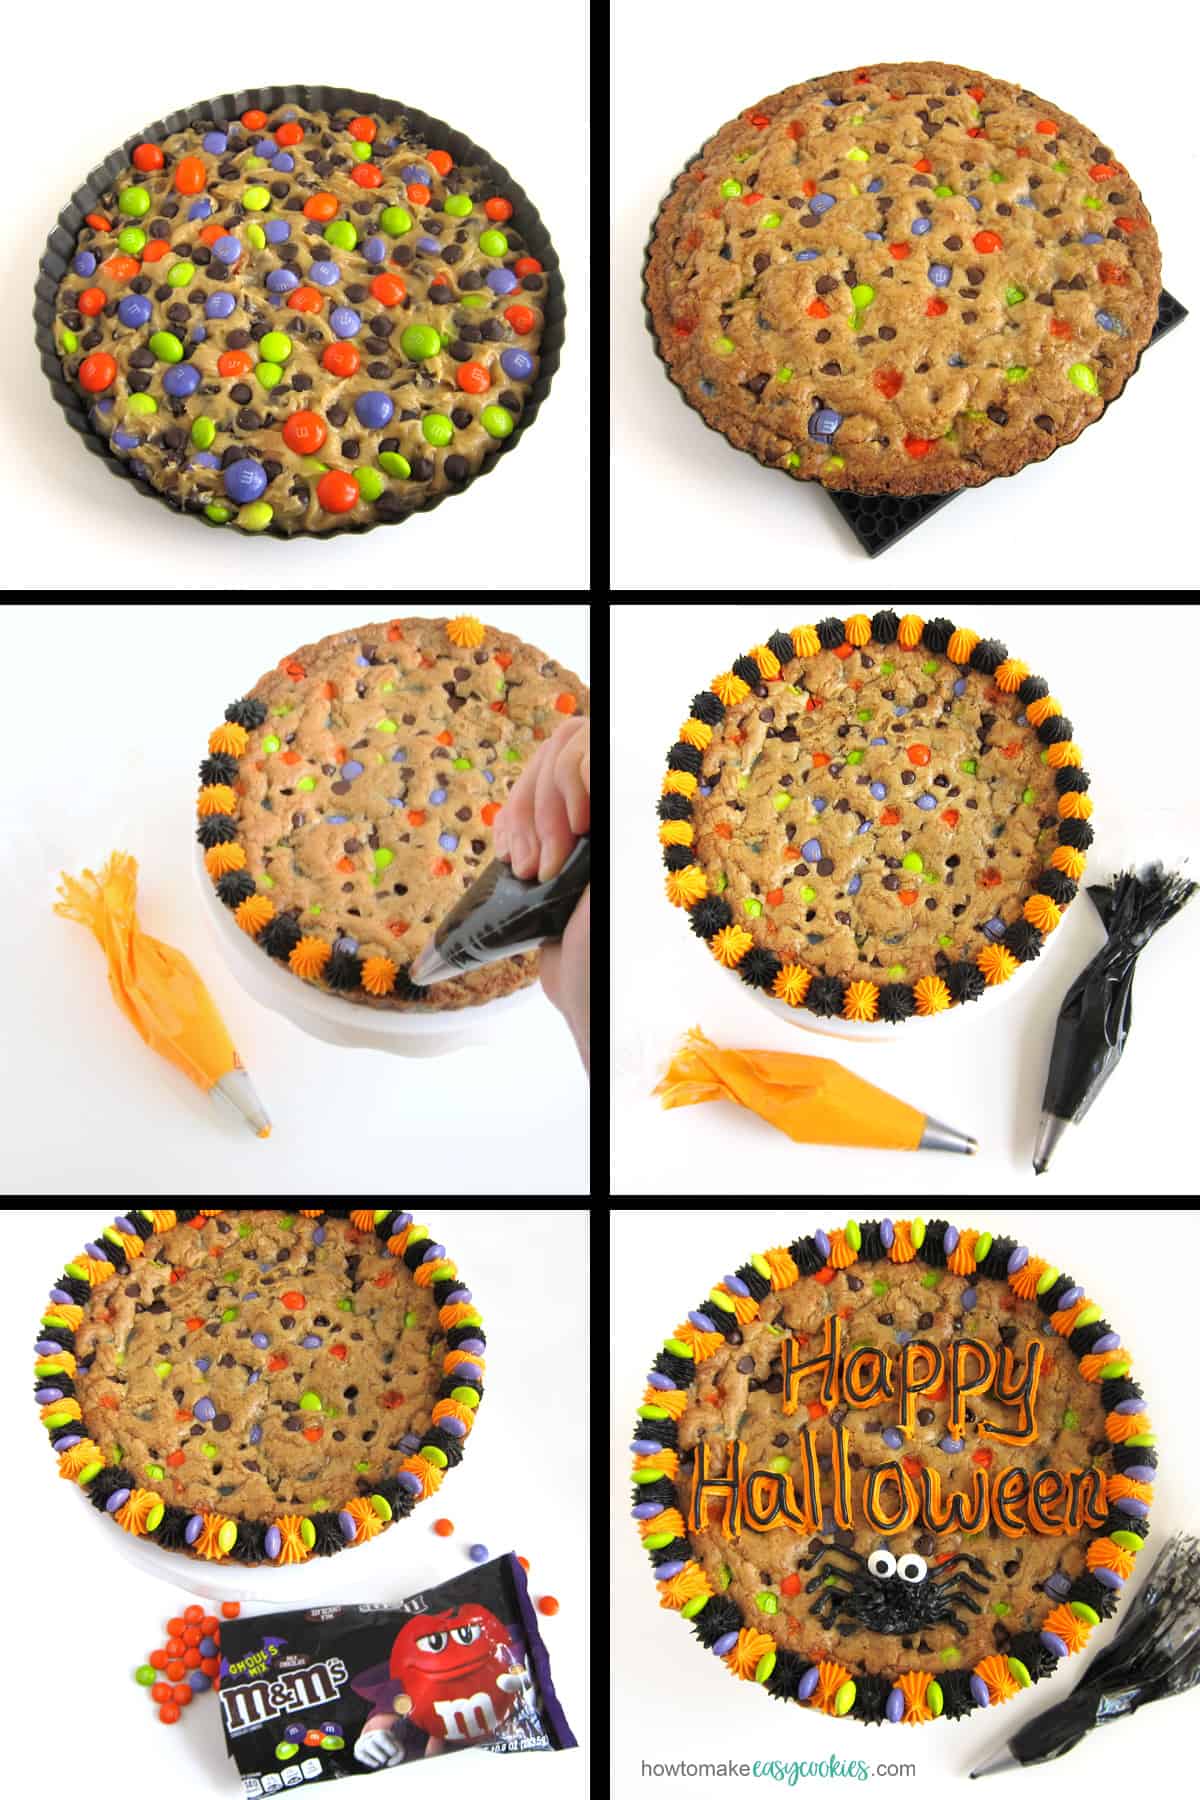 Pipe orange and black frosting around the edge of the Halloween cookie cake then add M&M's and a design